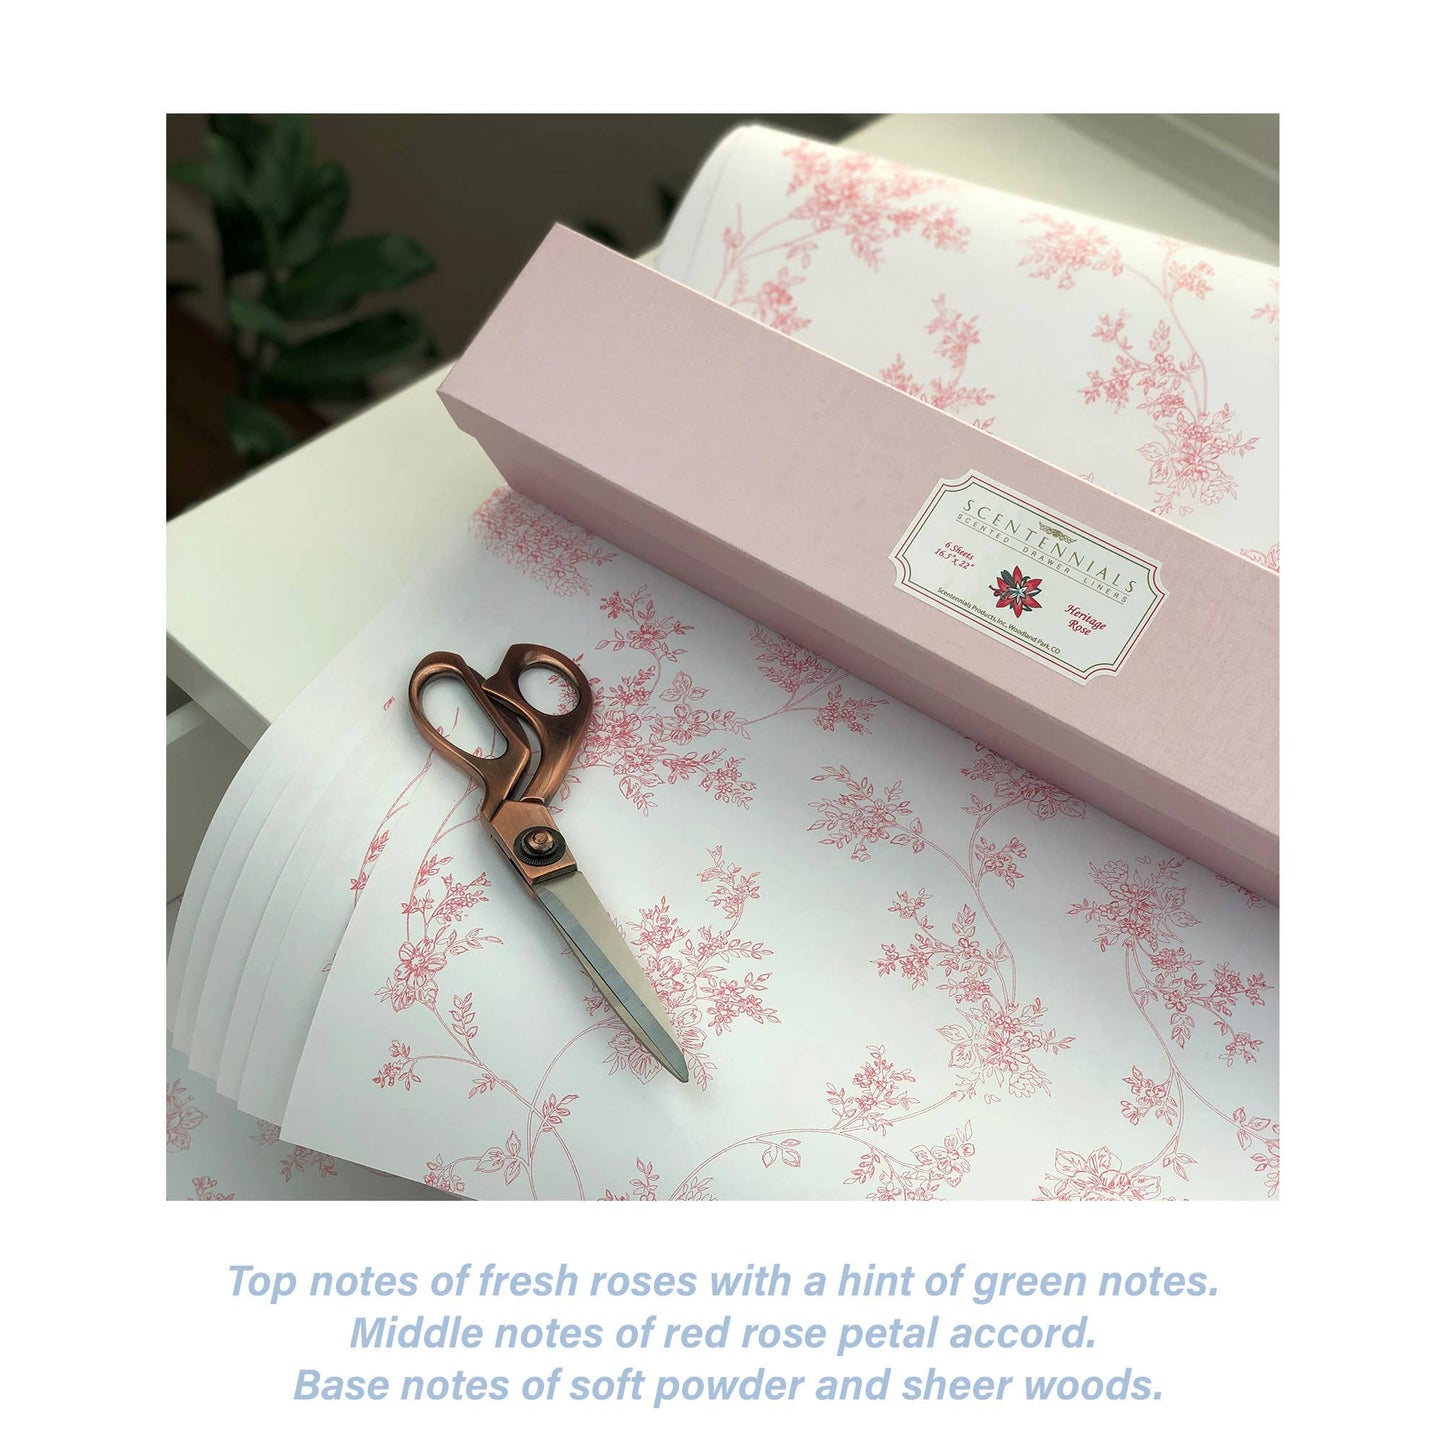 Scentennials Products - Floral Scented Drawer Liners